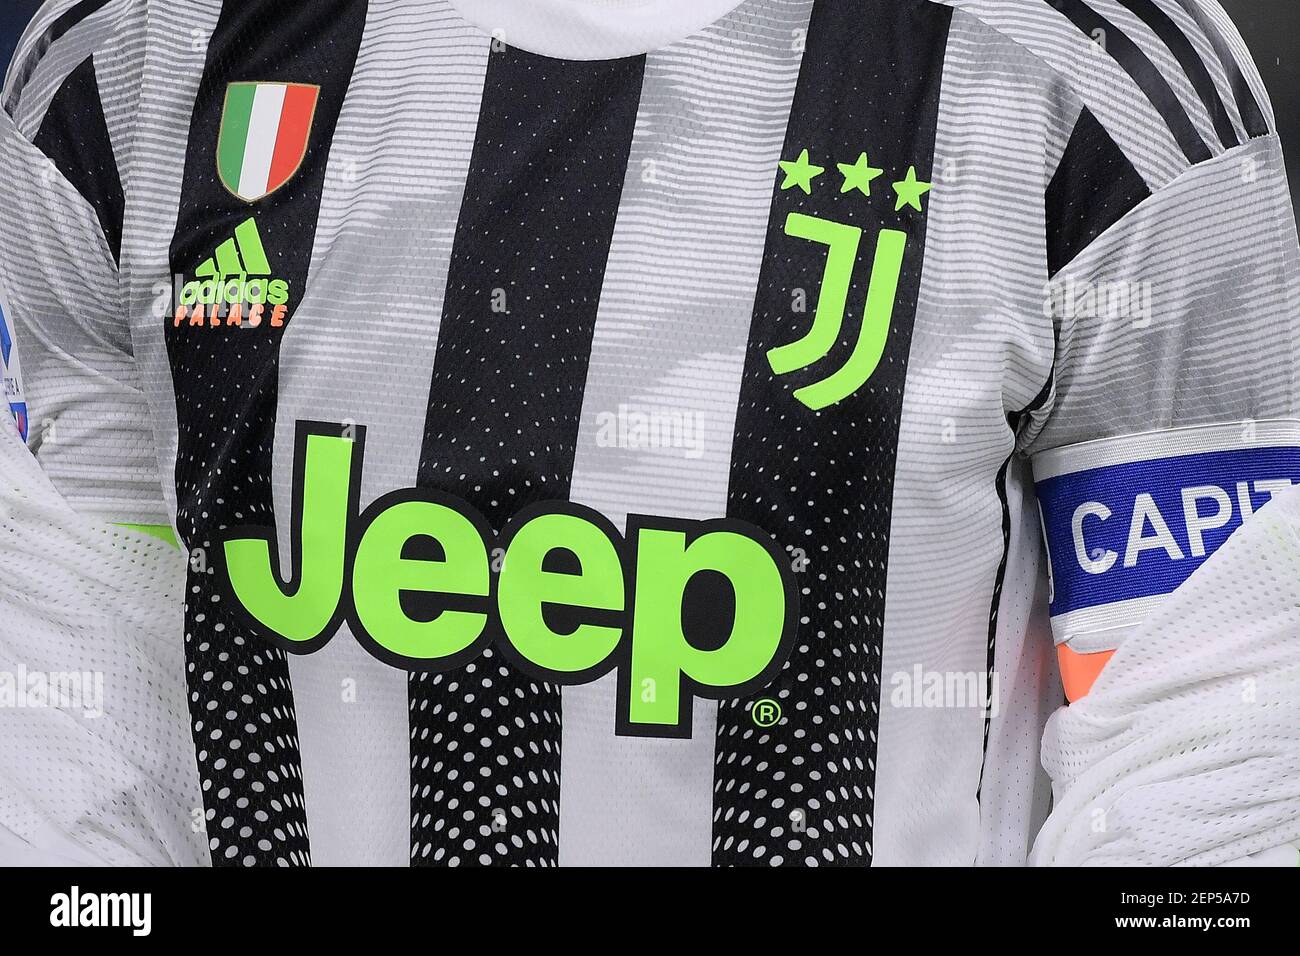 The special edition of Juventus shirt designed by Palace brand in  cooperation with Adidas Torino 30/